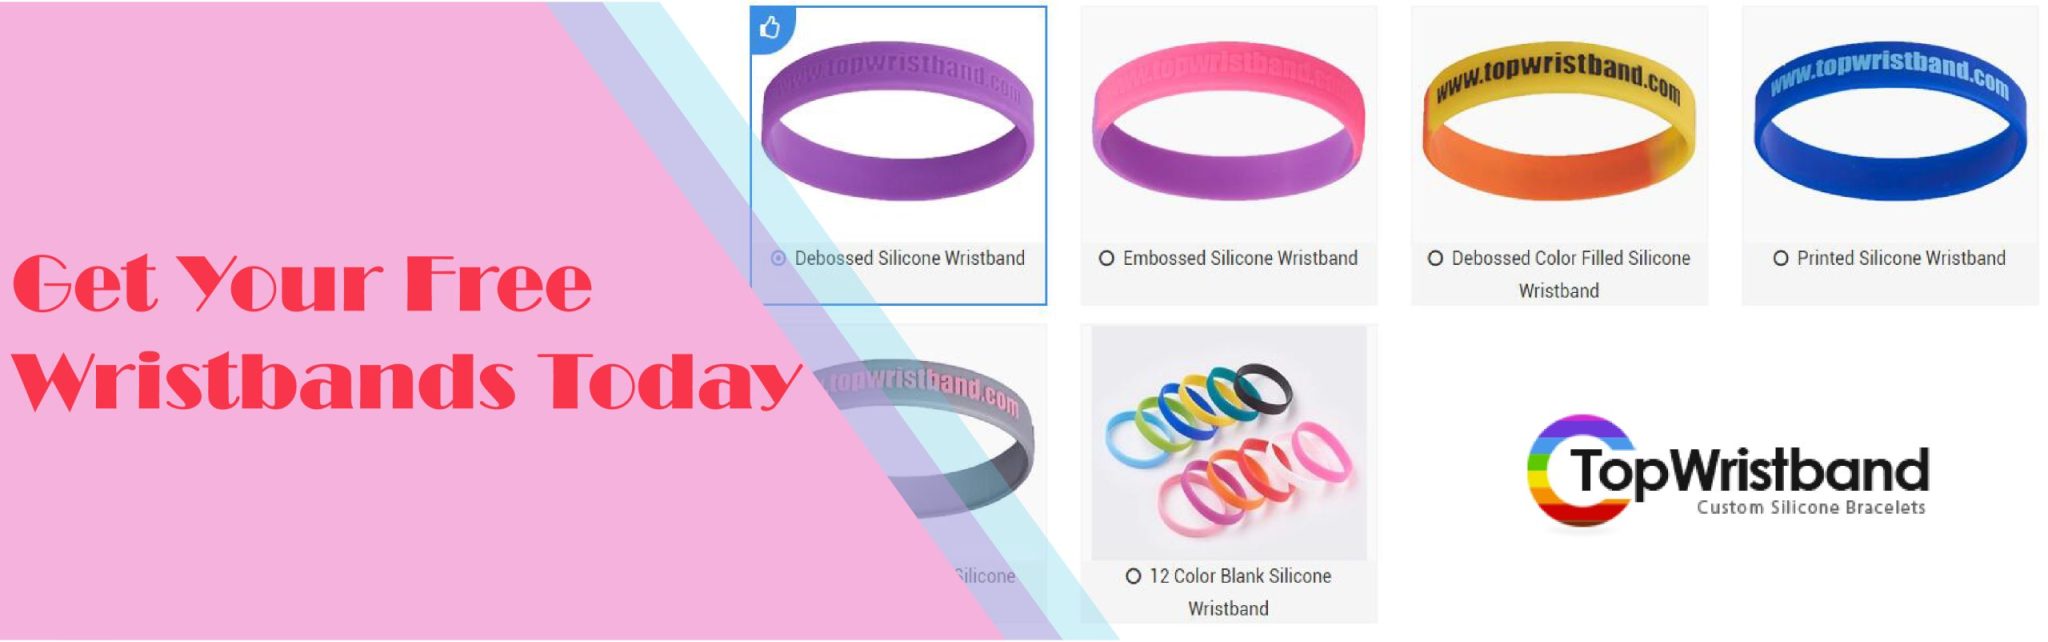 Get Your Free Wristbands Today: Add Style to Your Look Without Breaking the Bank